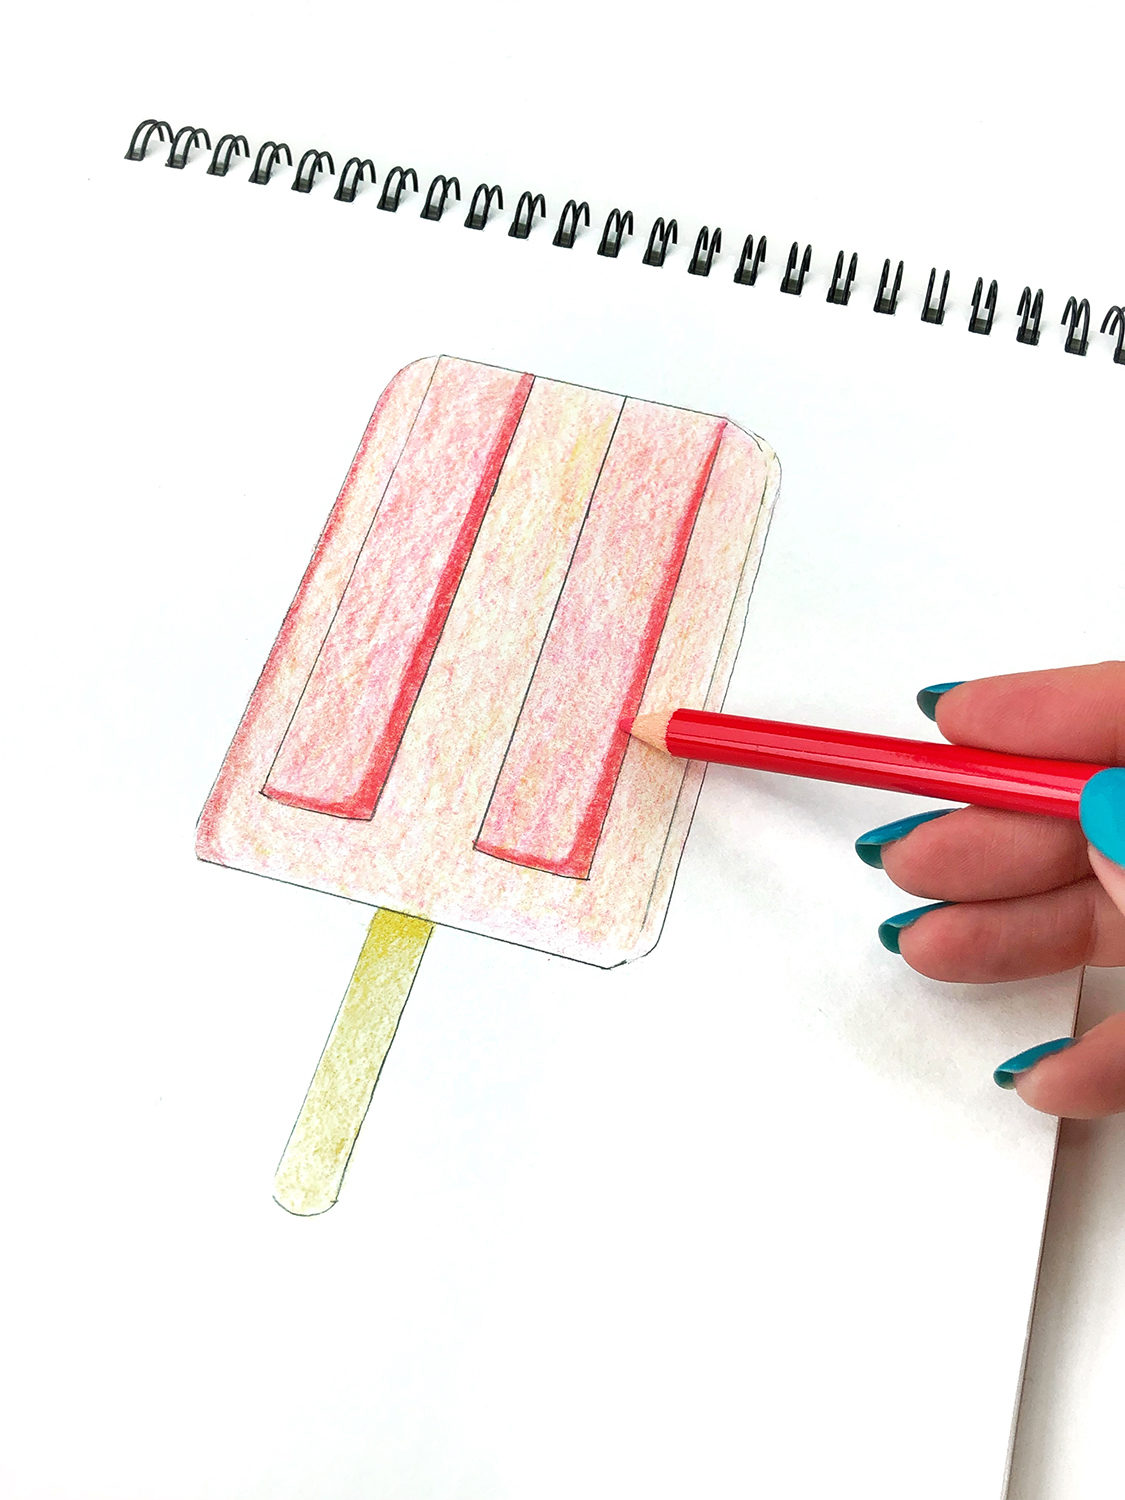 How to Draw a Colored Pencil Popsicle by Jessica Mack on behalf of Tombow.